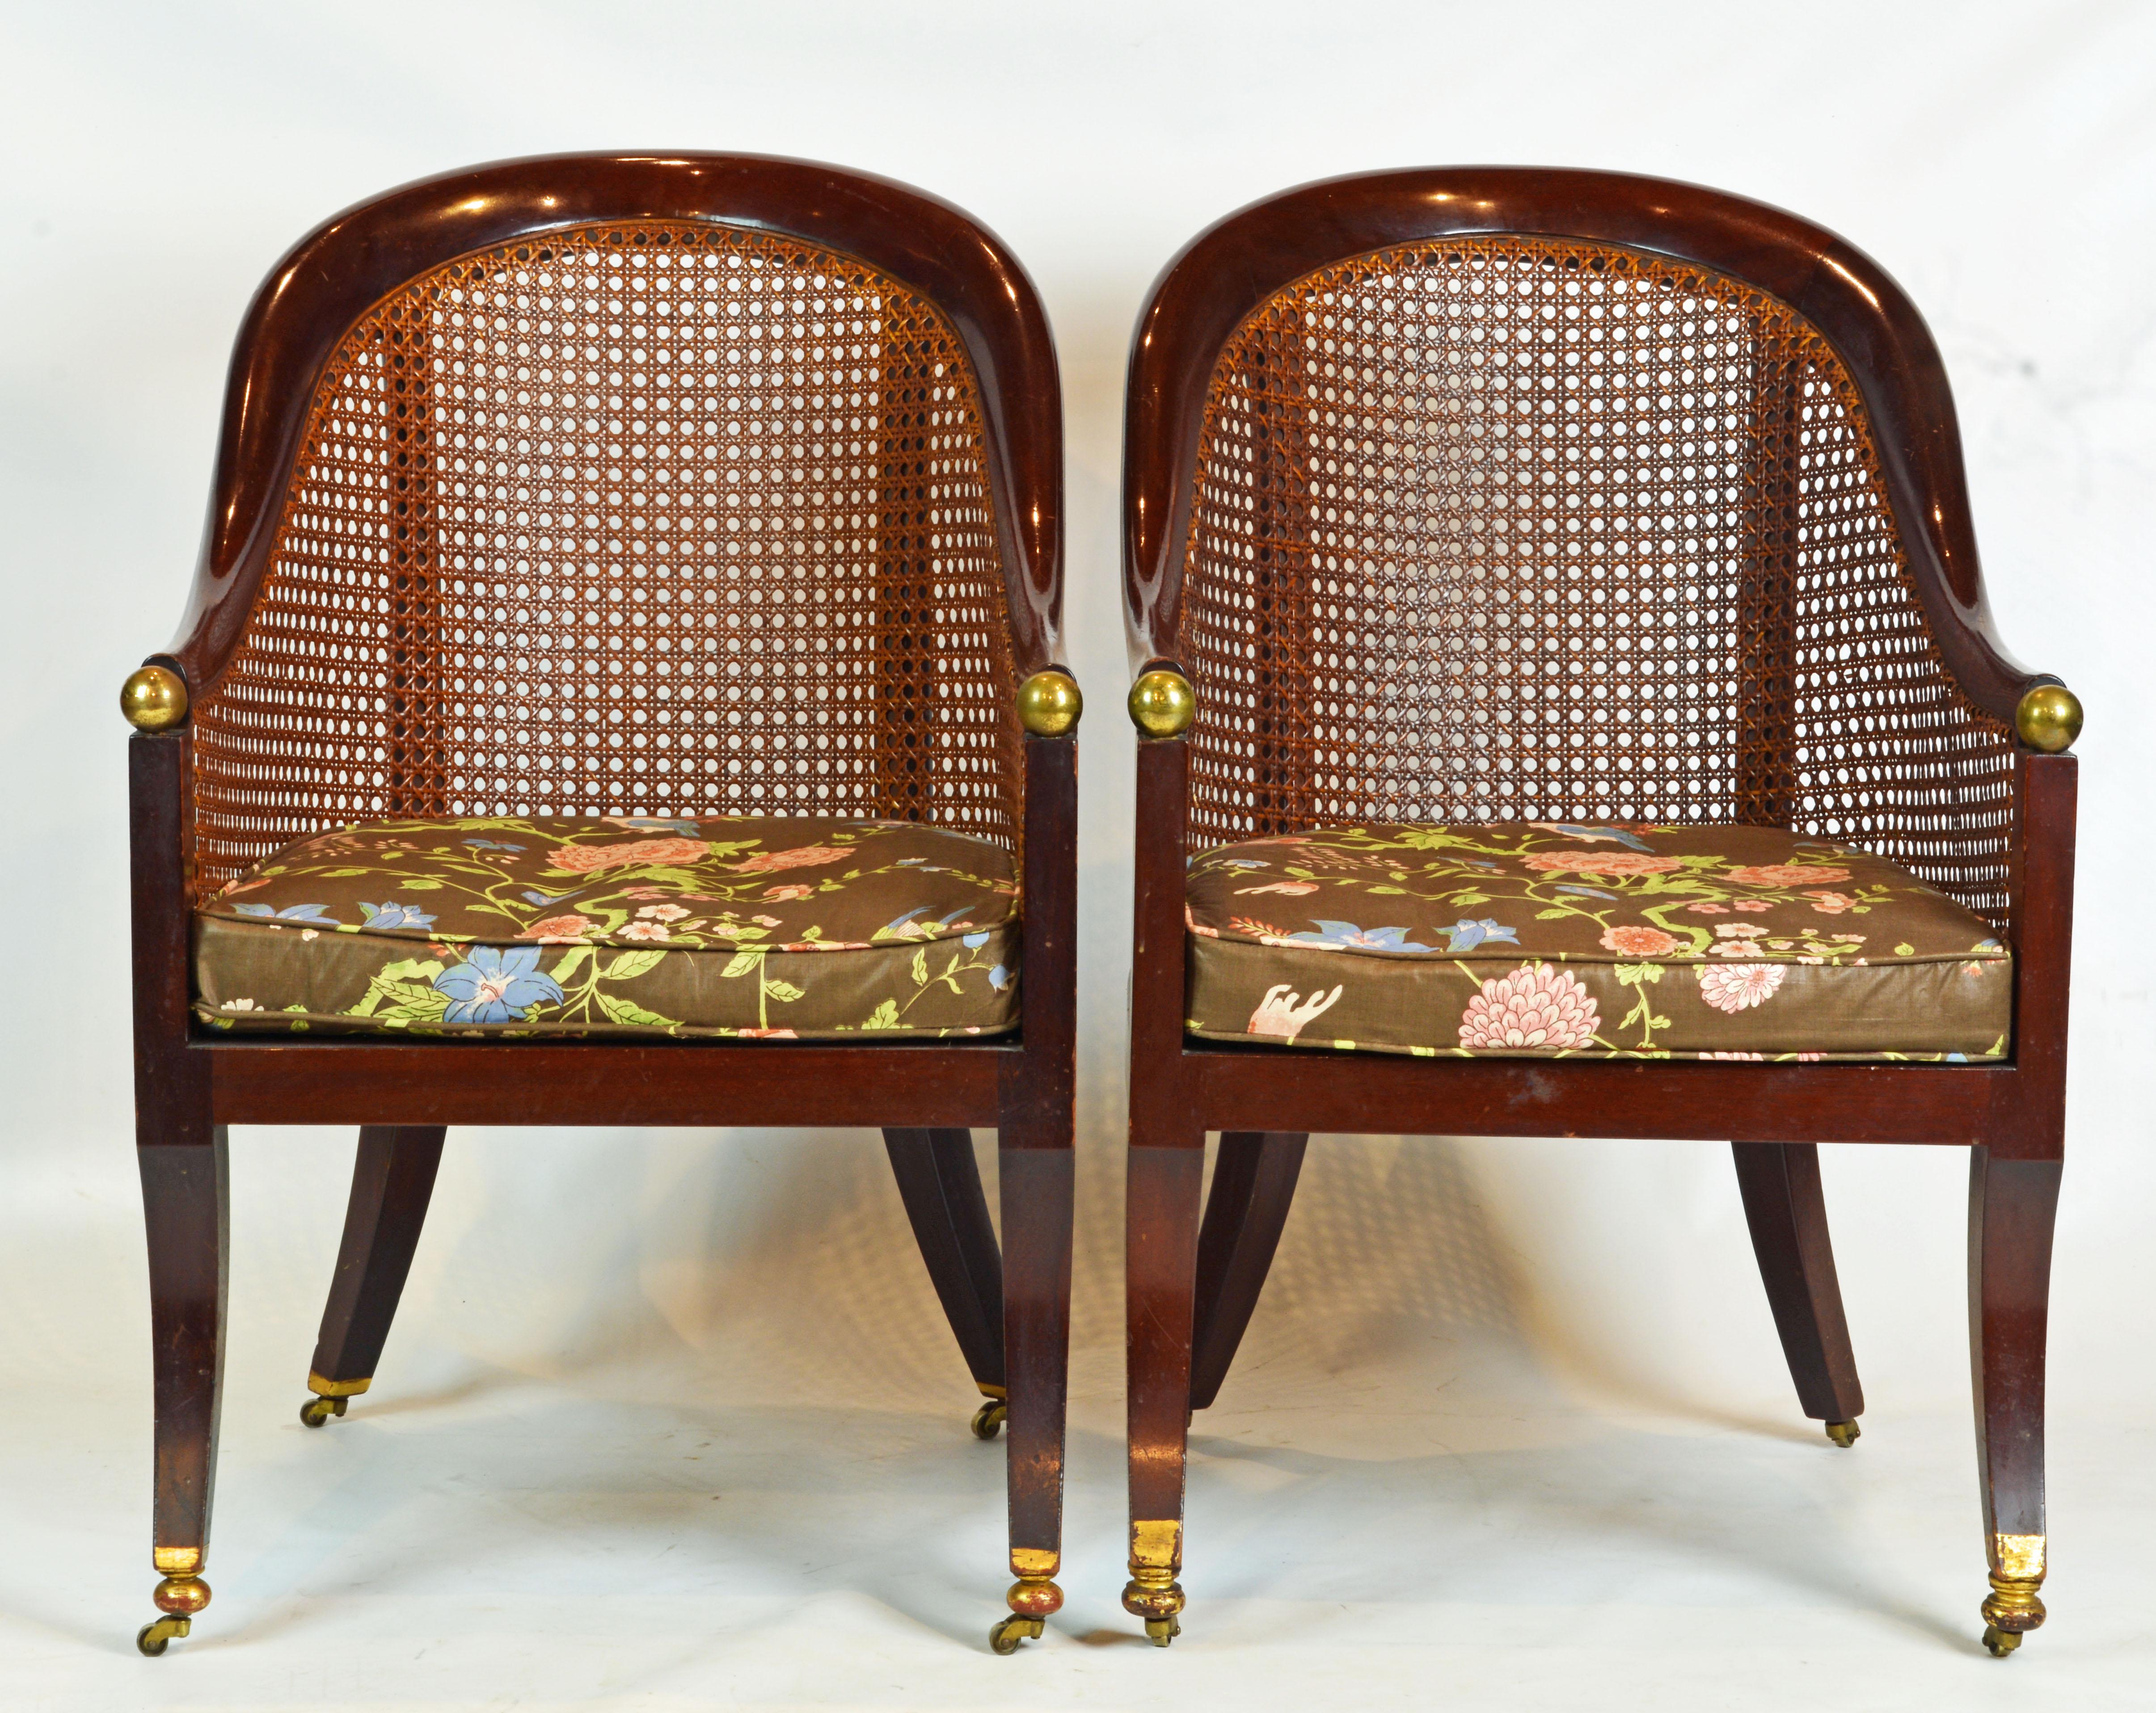 These chairs feature arm rests and back rails designed as continuous elegant curves joining the sabre style front legs by a brass ball. Back, sides and seat are mounted with woven cane and the rear legs continue in uprights to support the back rail